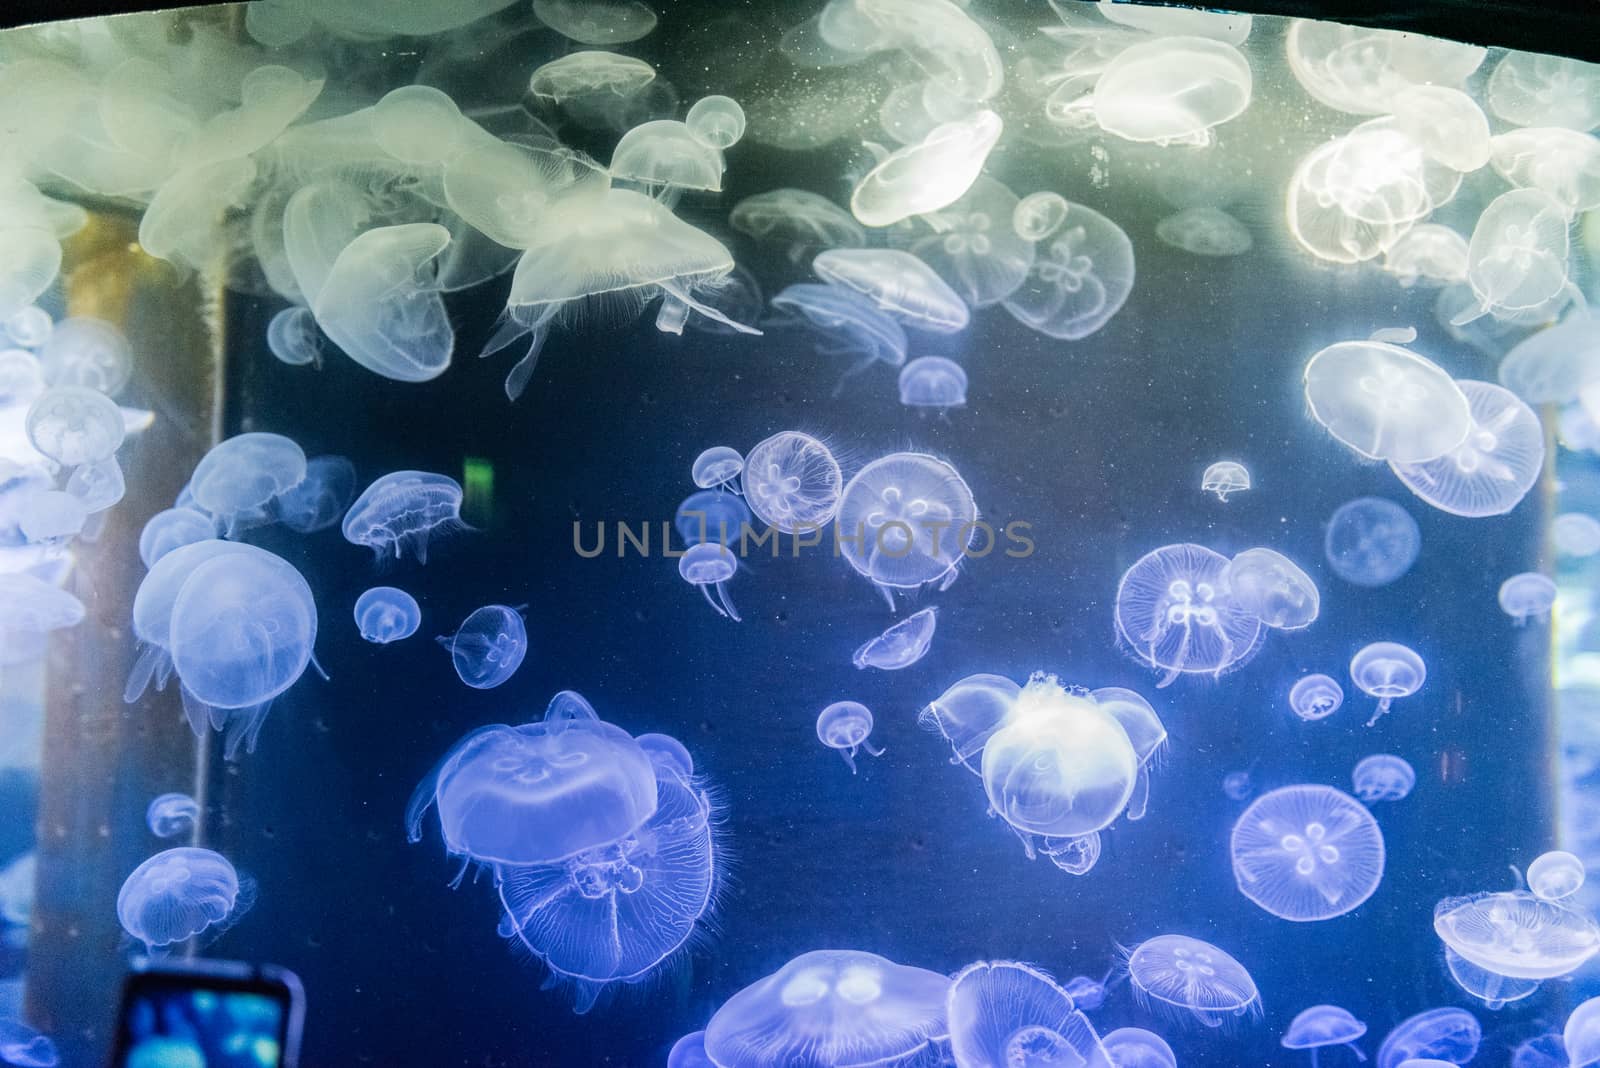 Closeup of small jellyfishes moving chaotically in aquarium environment